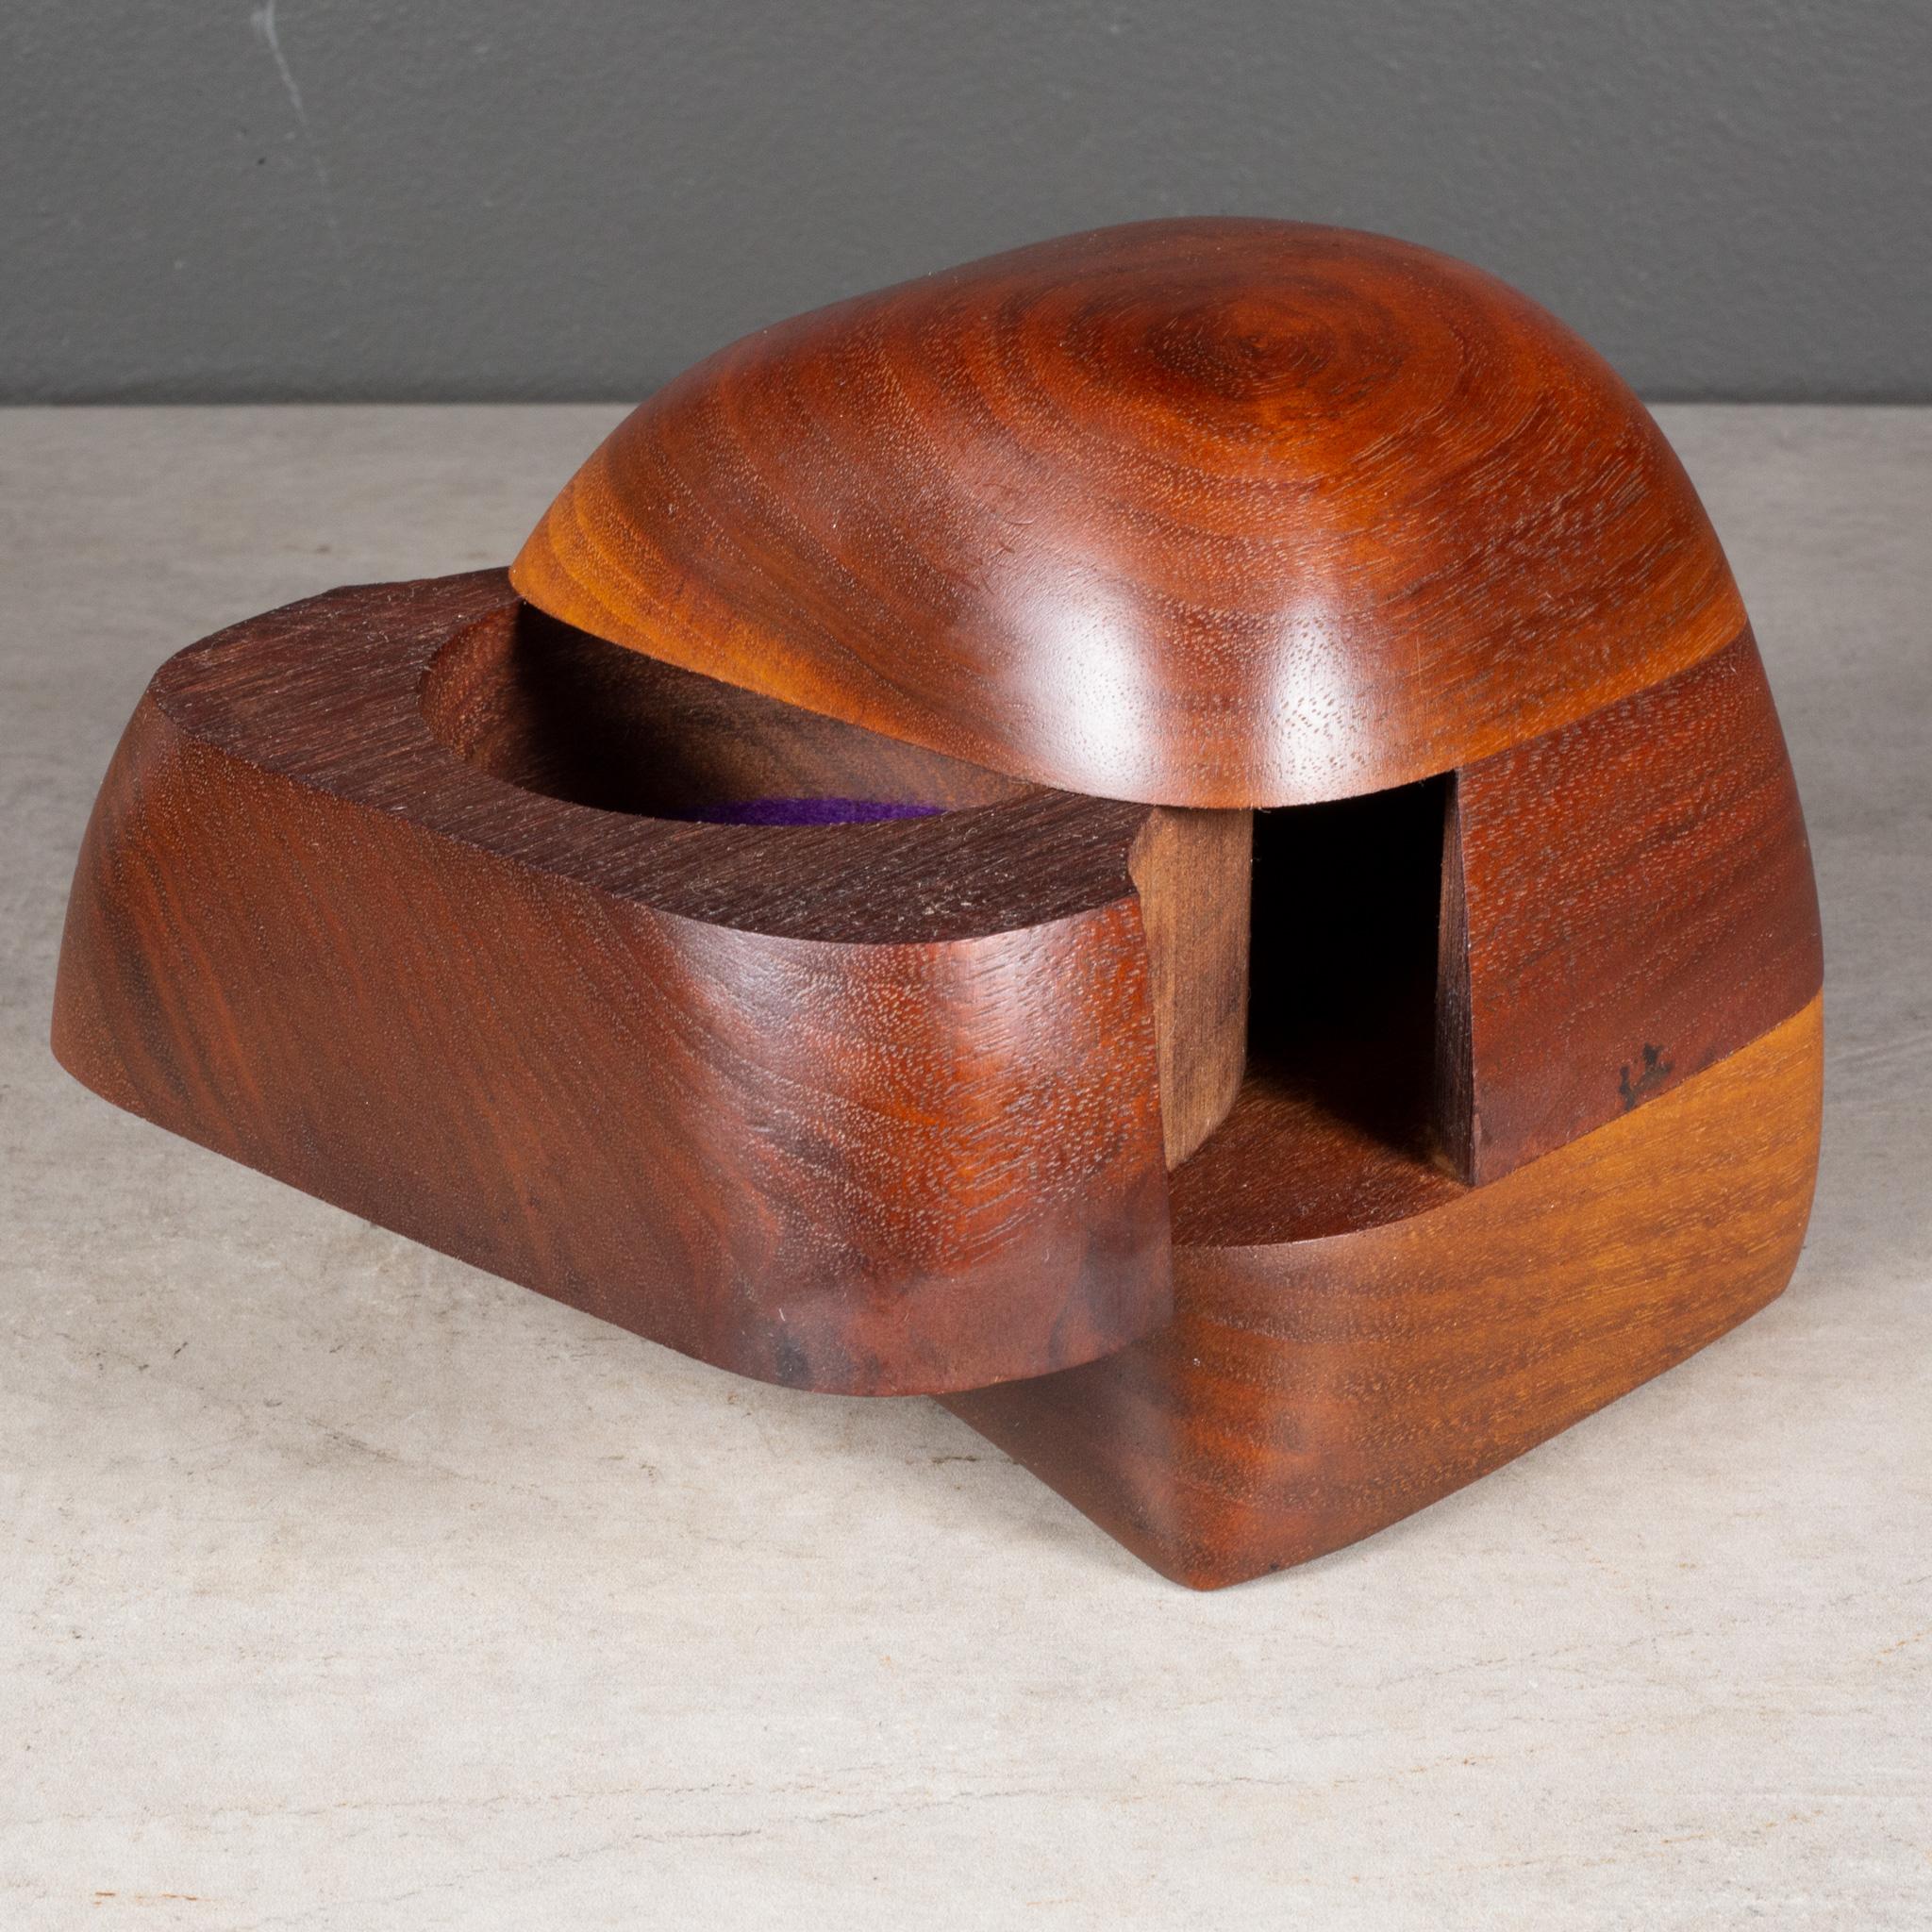 ABOUT

Original studio, handcrafted wood jewelry box by California woodworker, Dean Santner. Expertly crafted in walnut. Pull out center drawer lined in purple felt.

    CREATOR Dean Santner, Berkeley, CA.
    DATE OF MANUFACTURE c.1970.
   